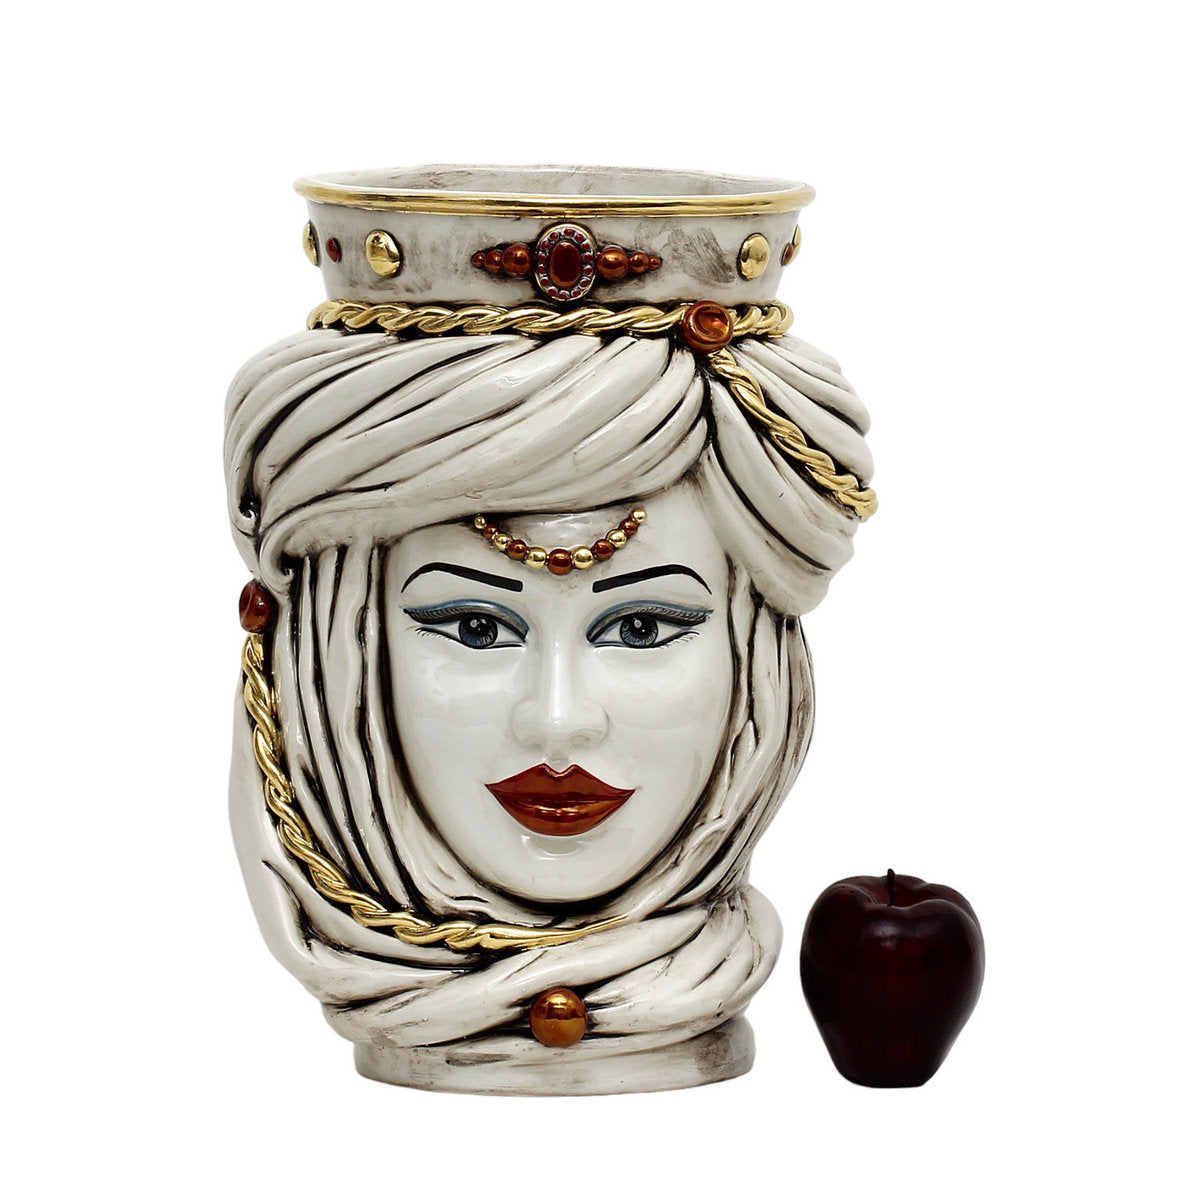 CALTAGIRONE: Moorish Sicilian Head Vase - Woman Antiqued White glaze with 24 Carats Gold Accents (Large)